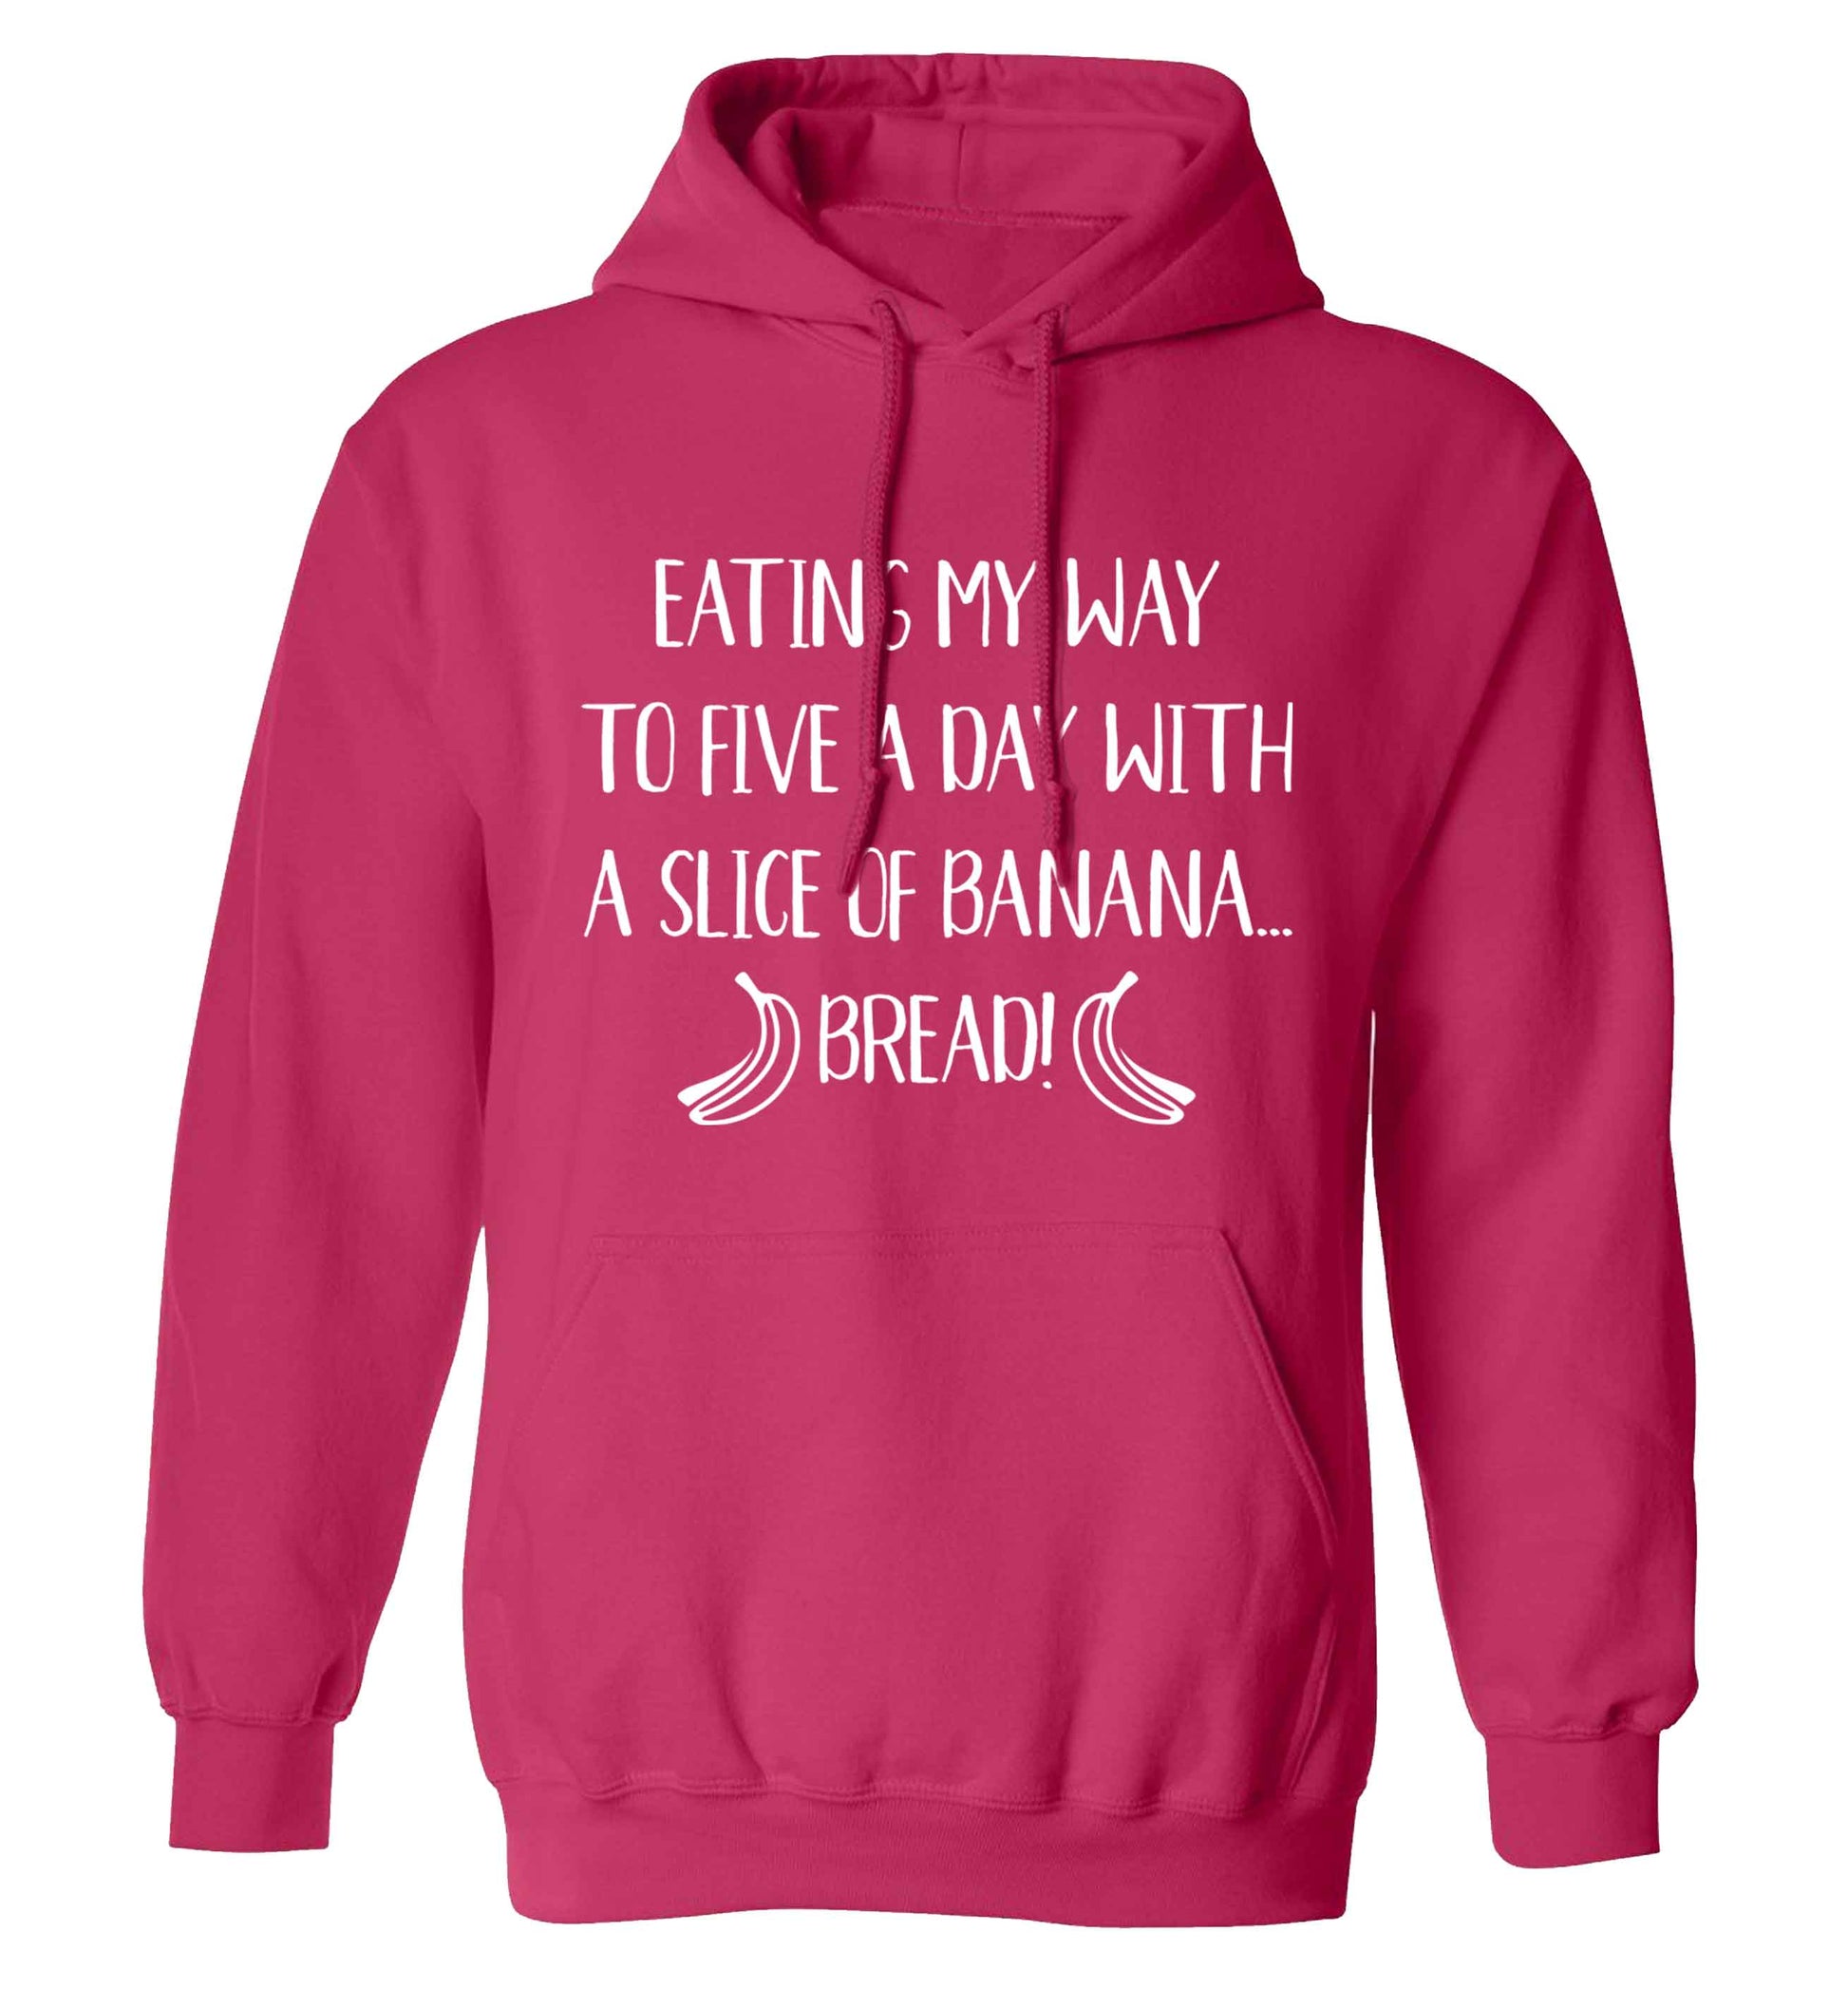 Eating my way to five a day with a slice of banana bread adults unisex pink hoodie 2XL